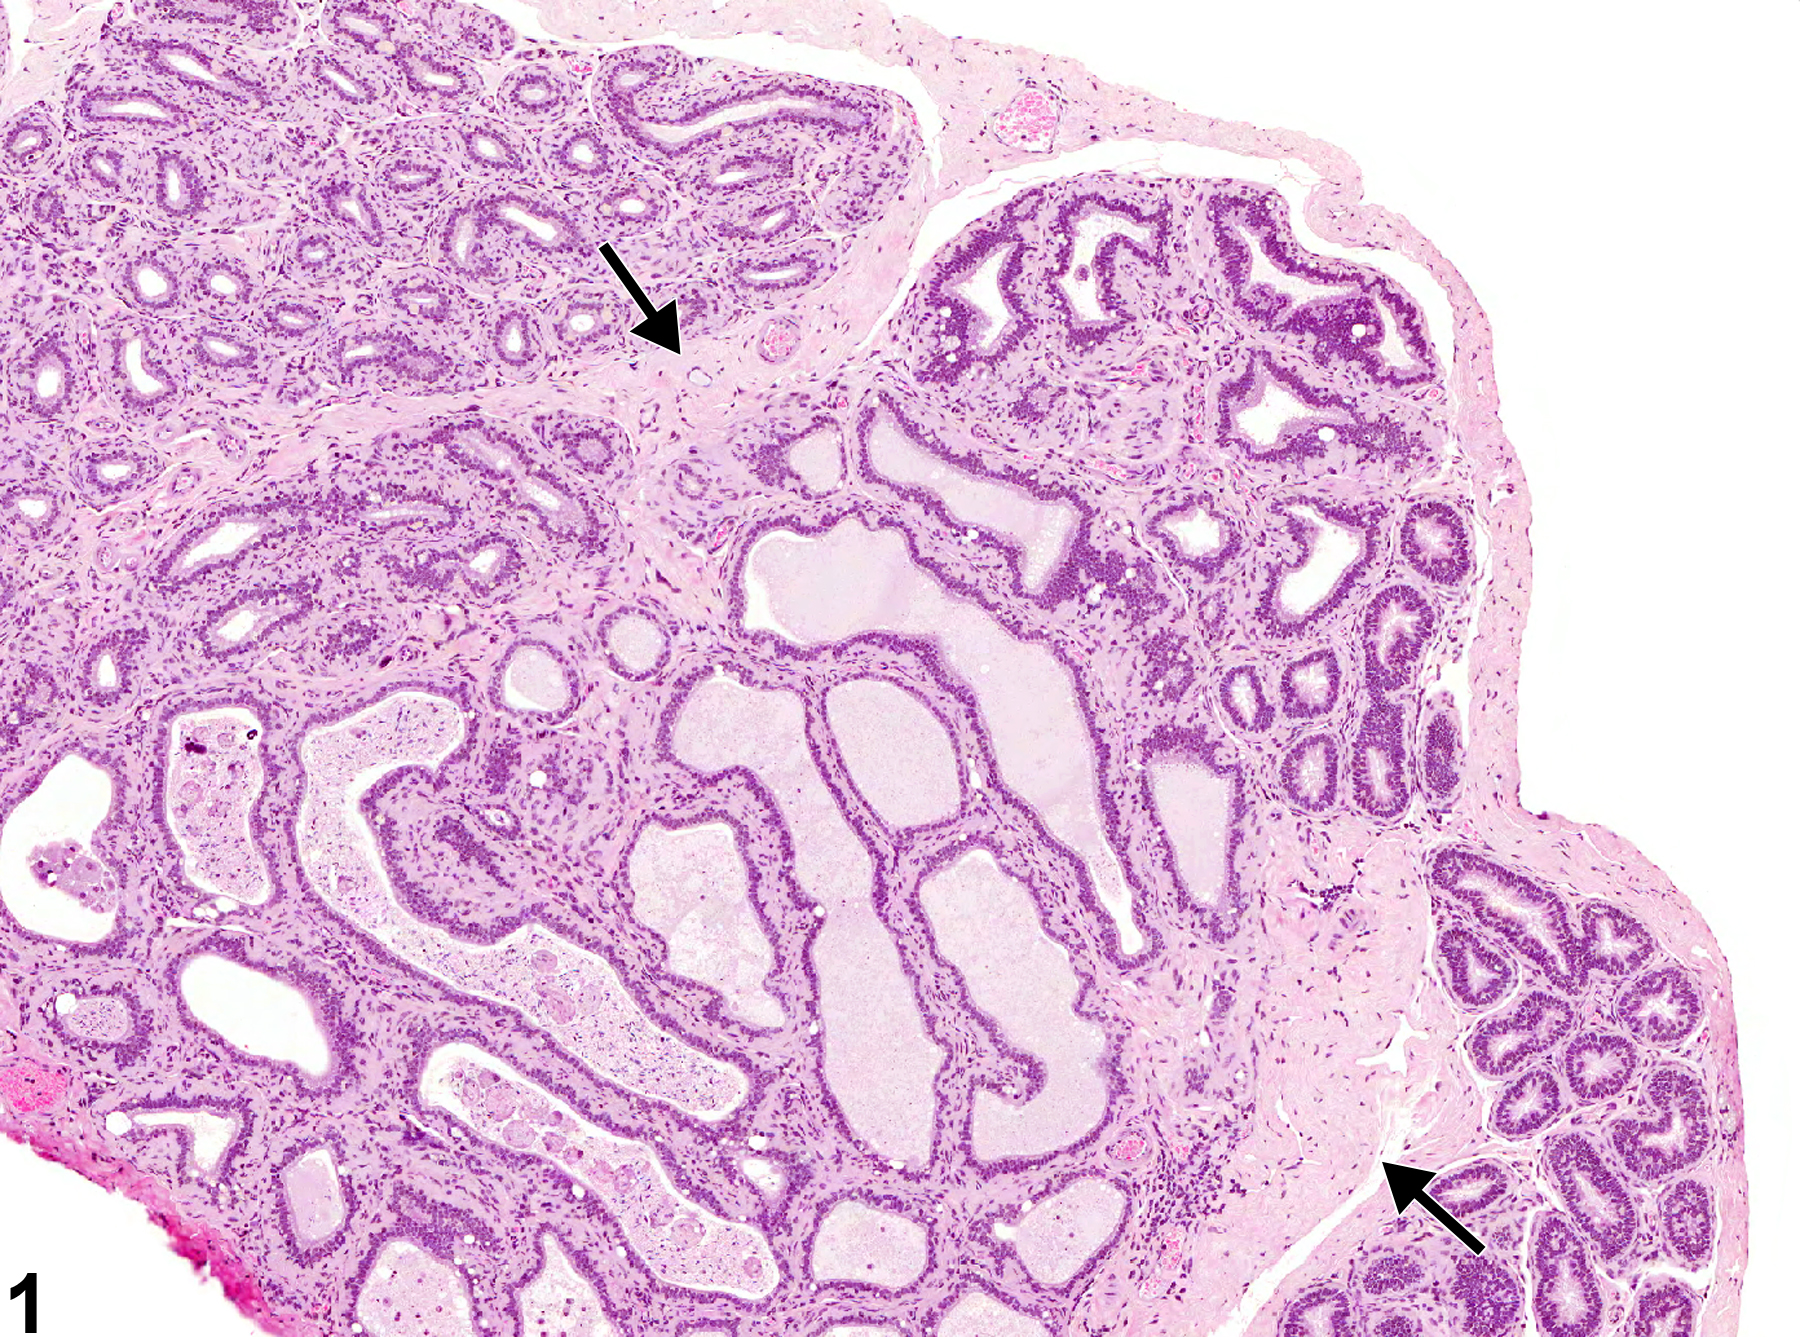 Image of amyloid in the epididymis from a male B6C3F1 mouse in a chronic study